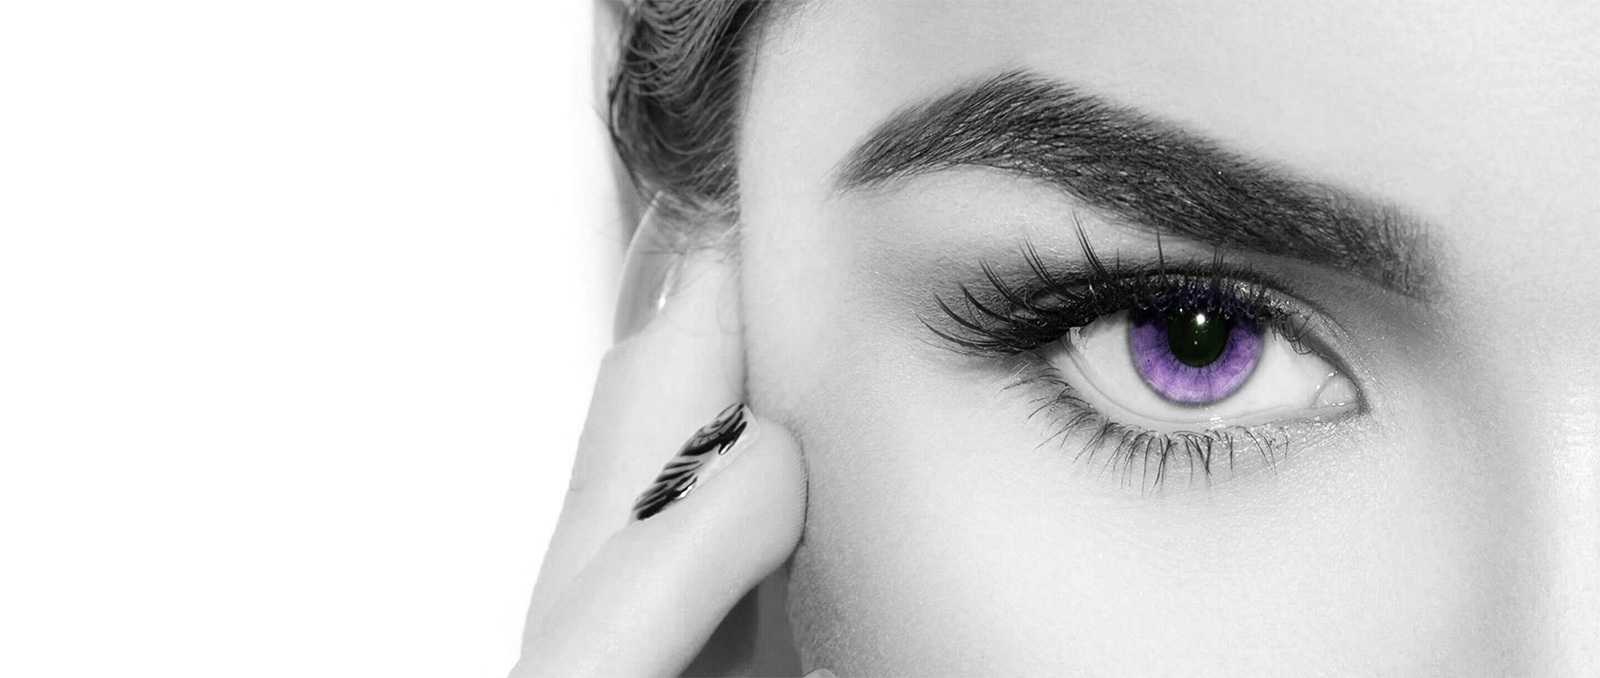 Ombré eyebrows by Camille Beaute